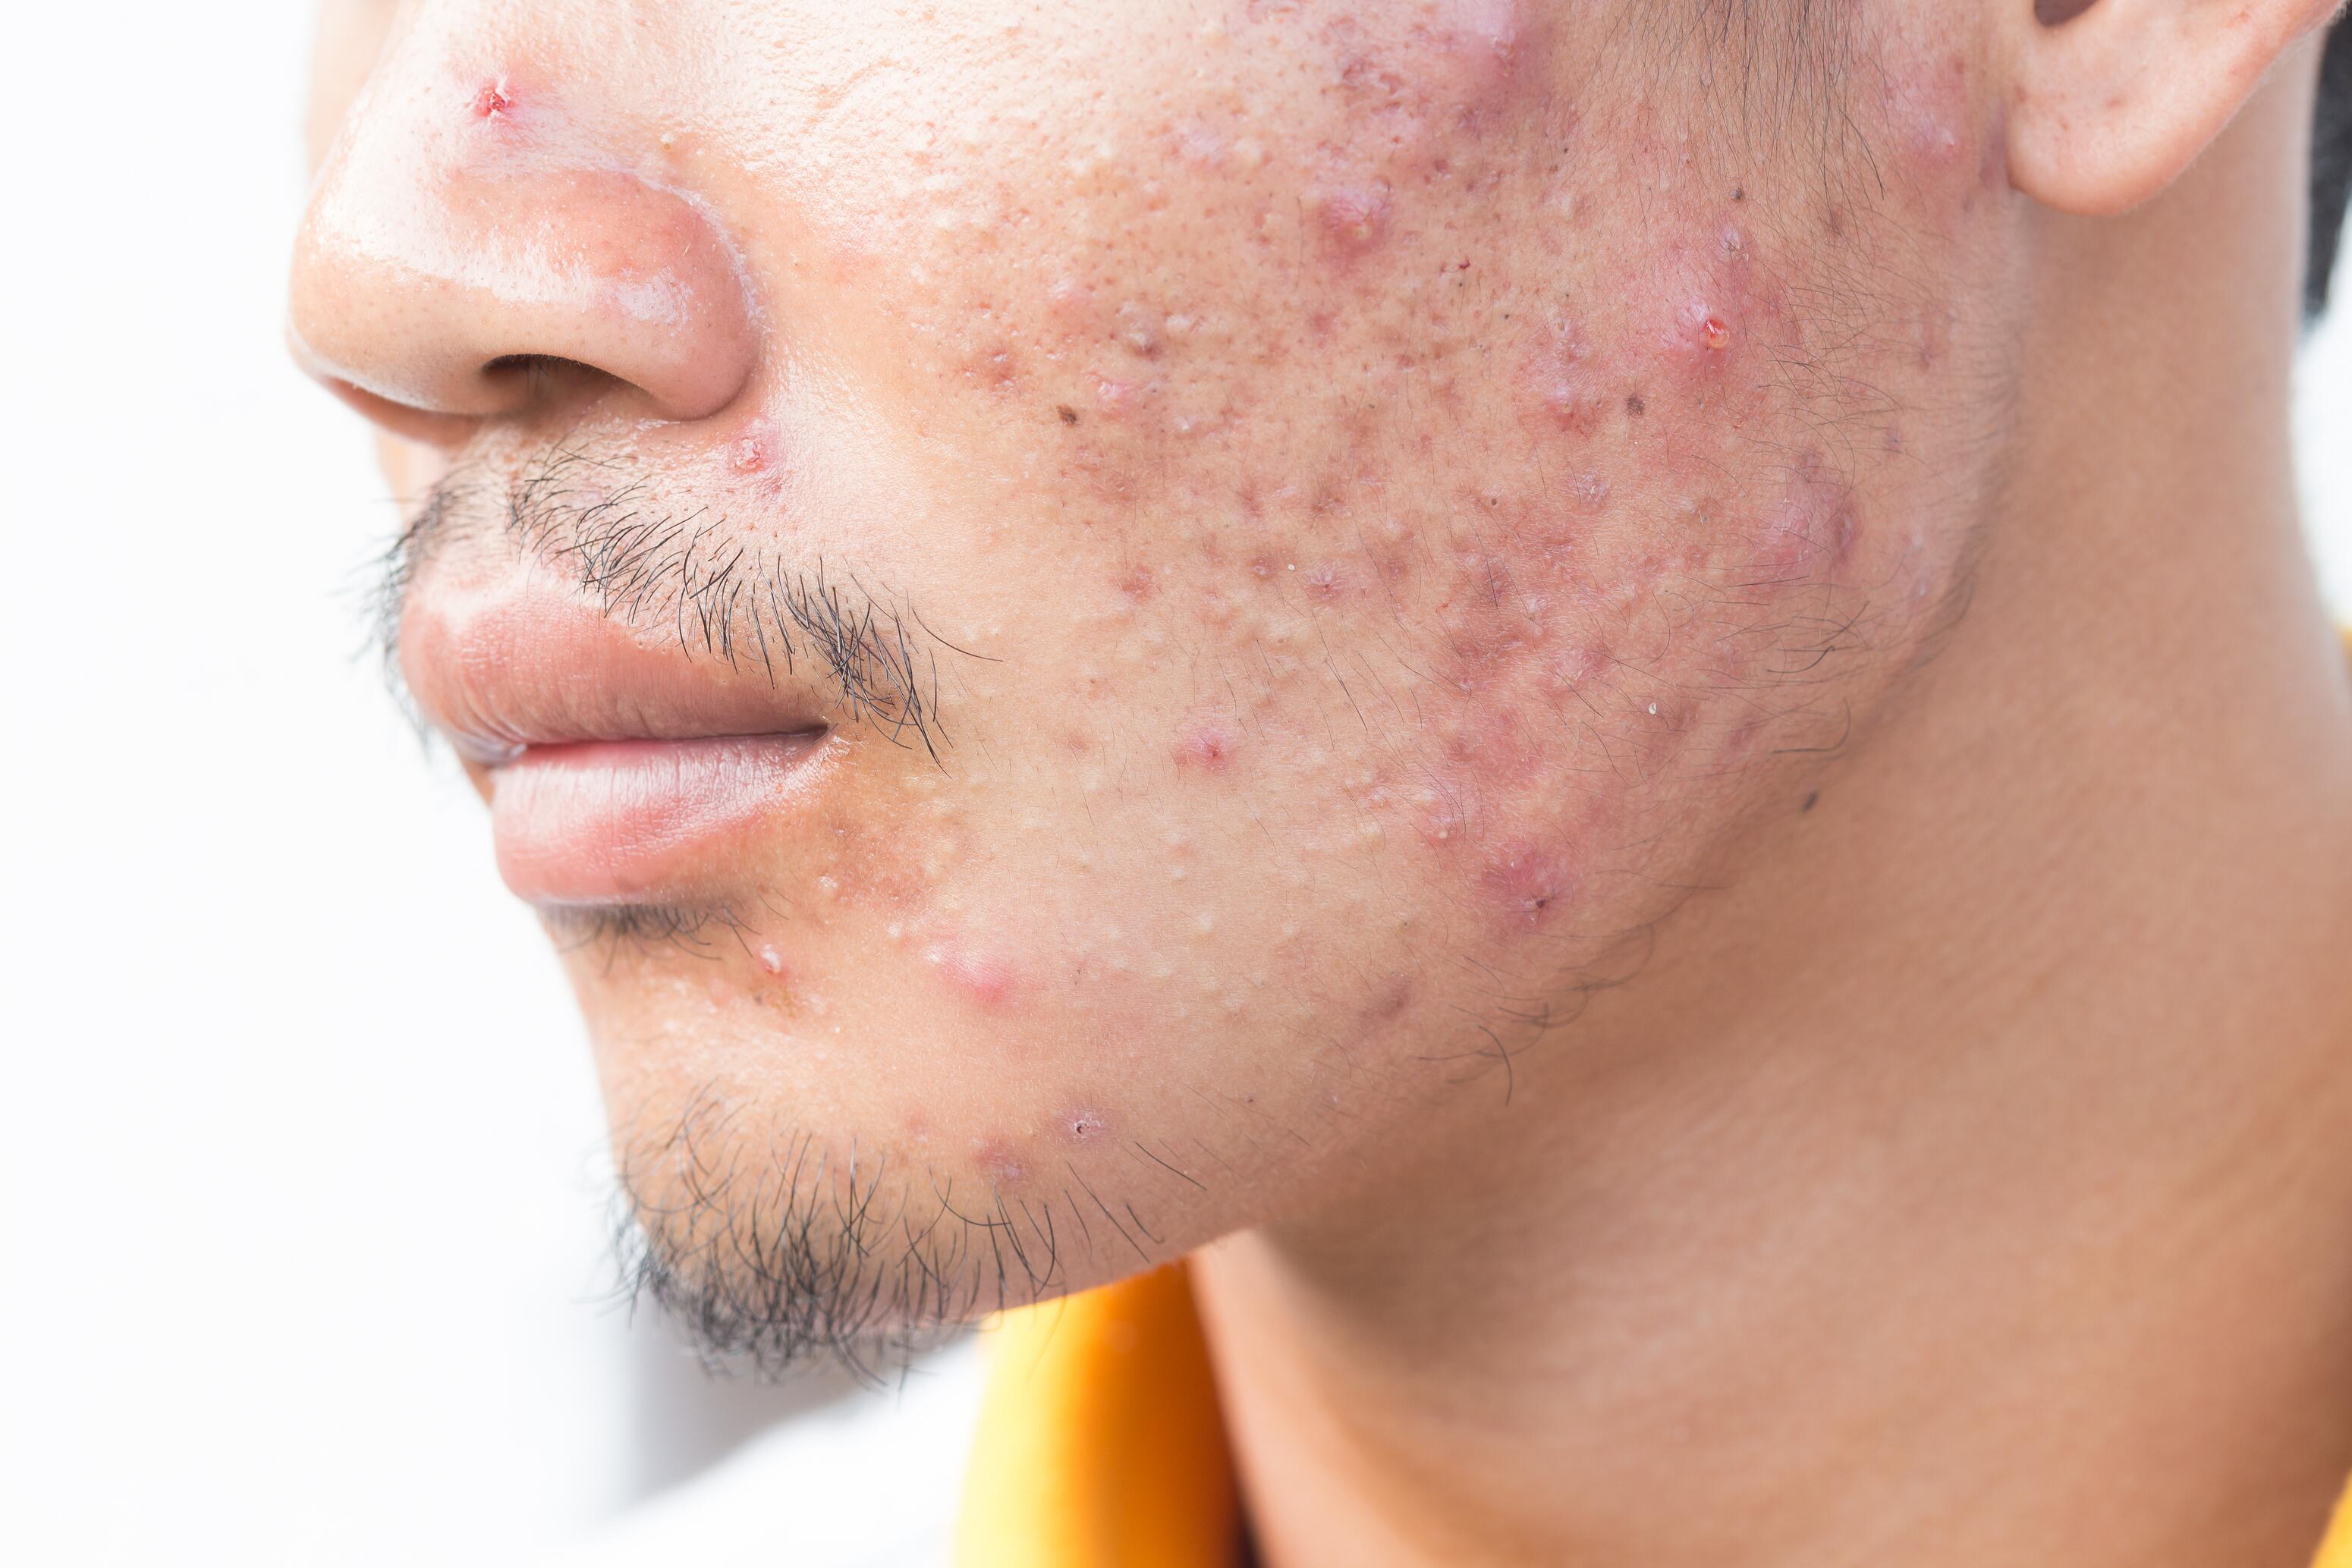 Men with acne on the face